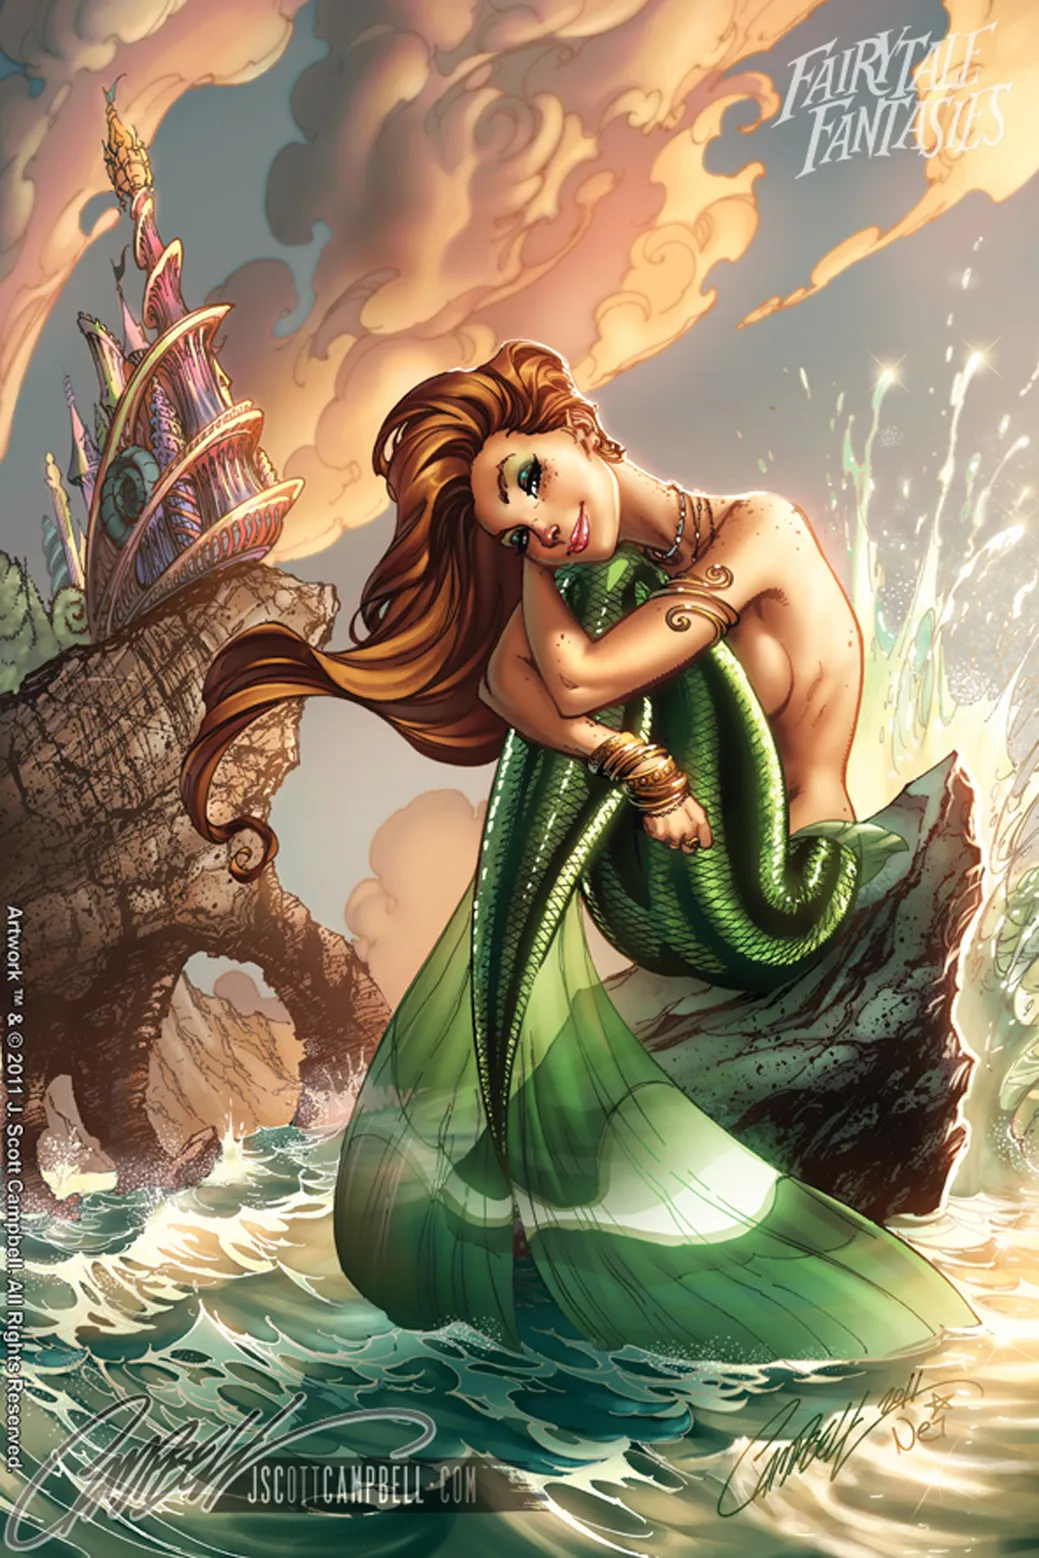 The Little Mermaid Movie Fabric Poster 36 X 24 Decor 03 From 8,25 € | DHgate